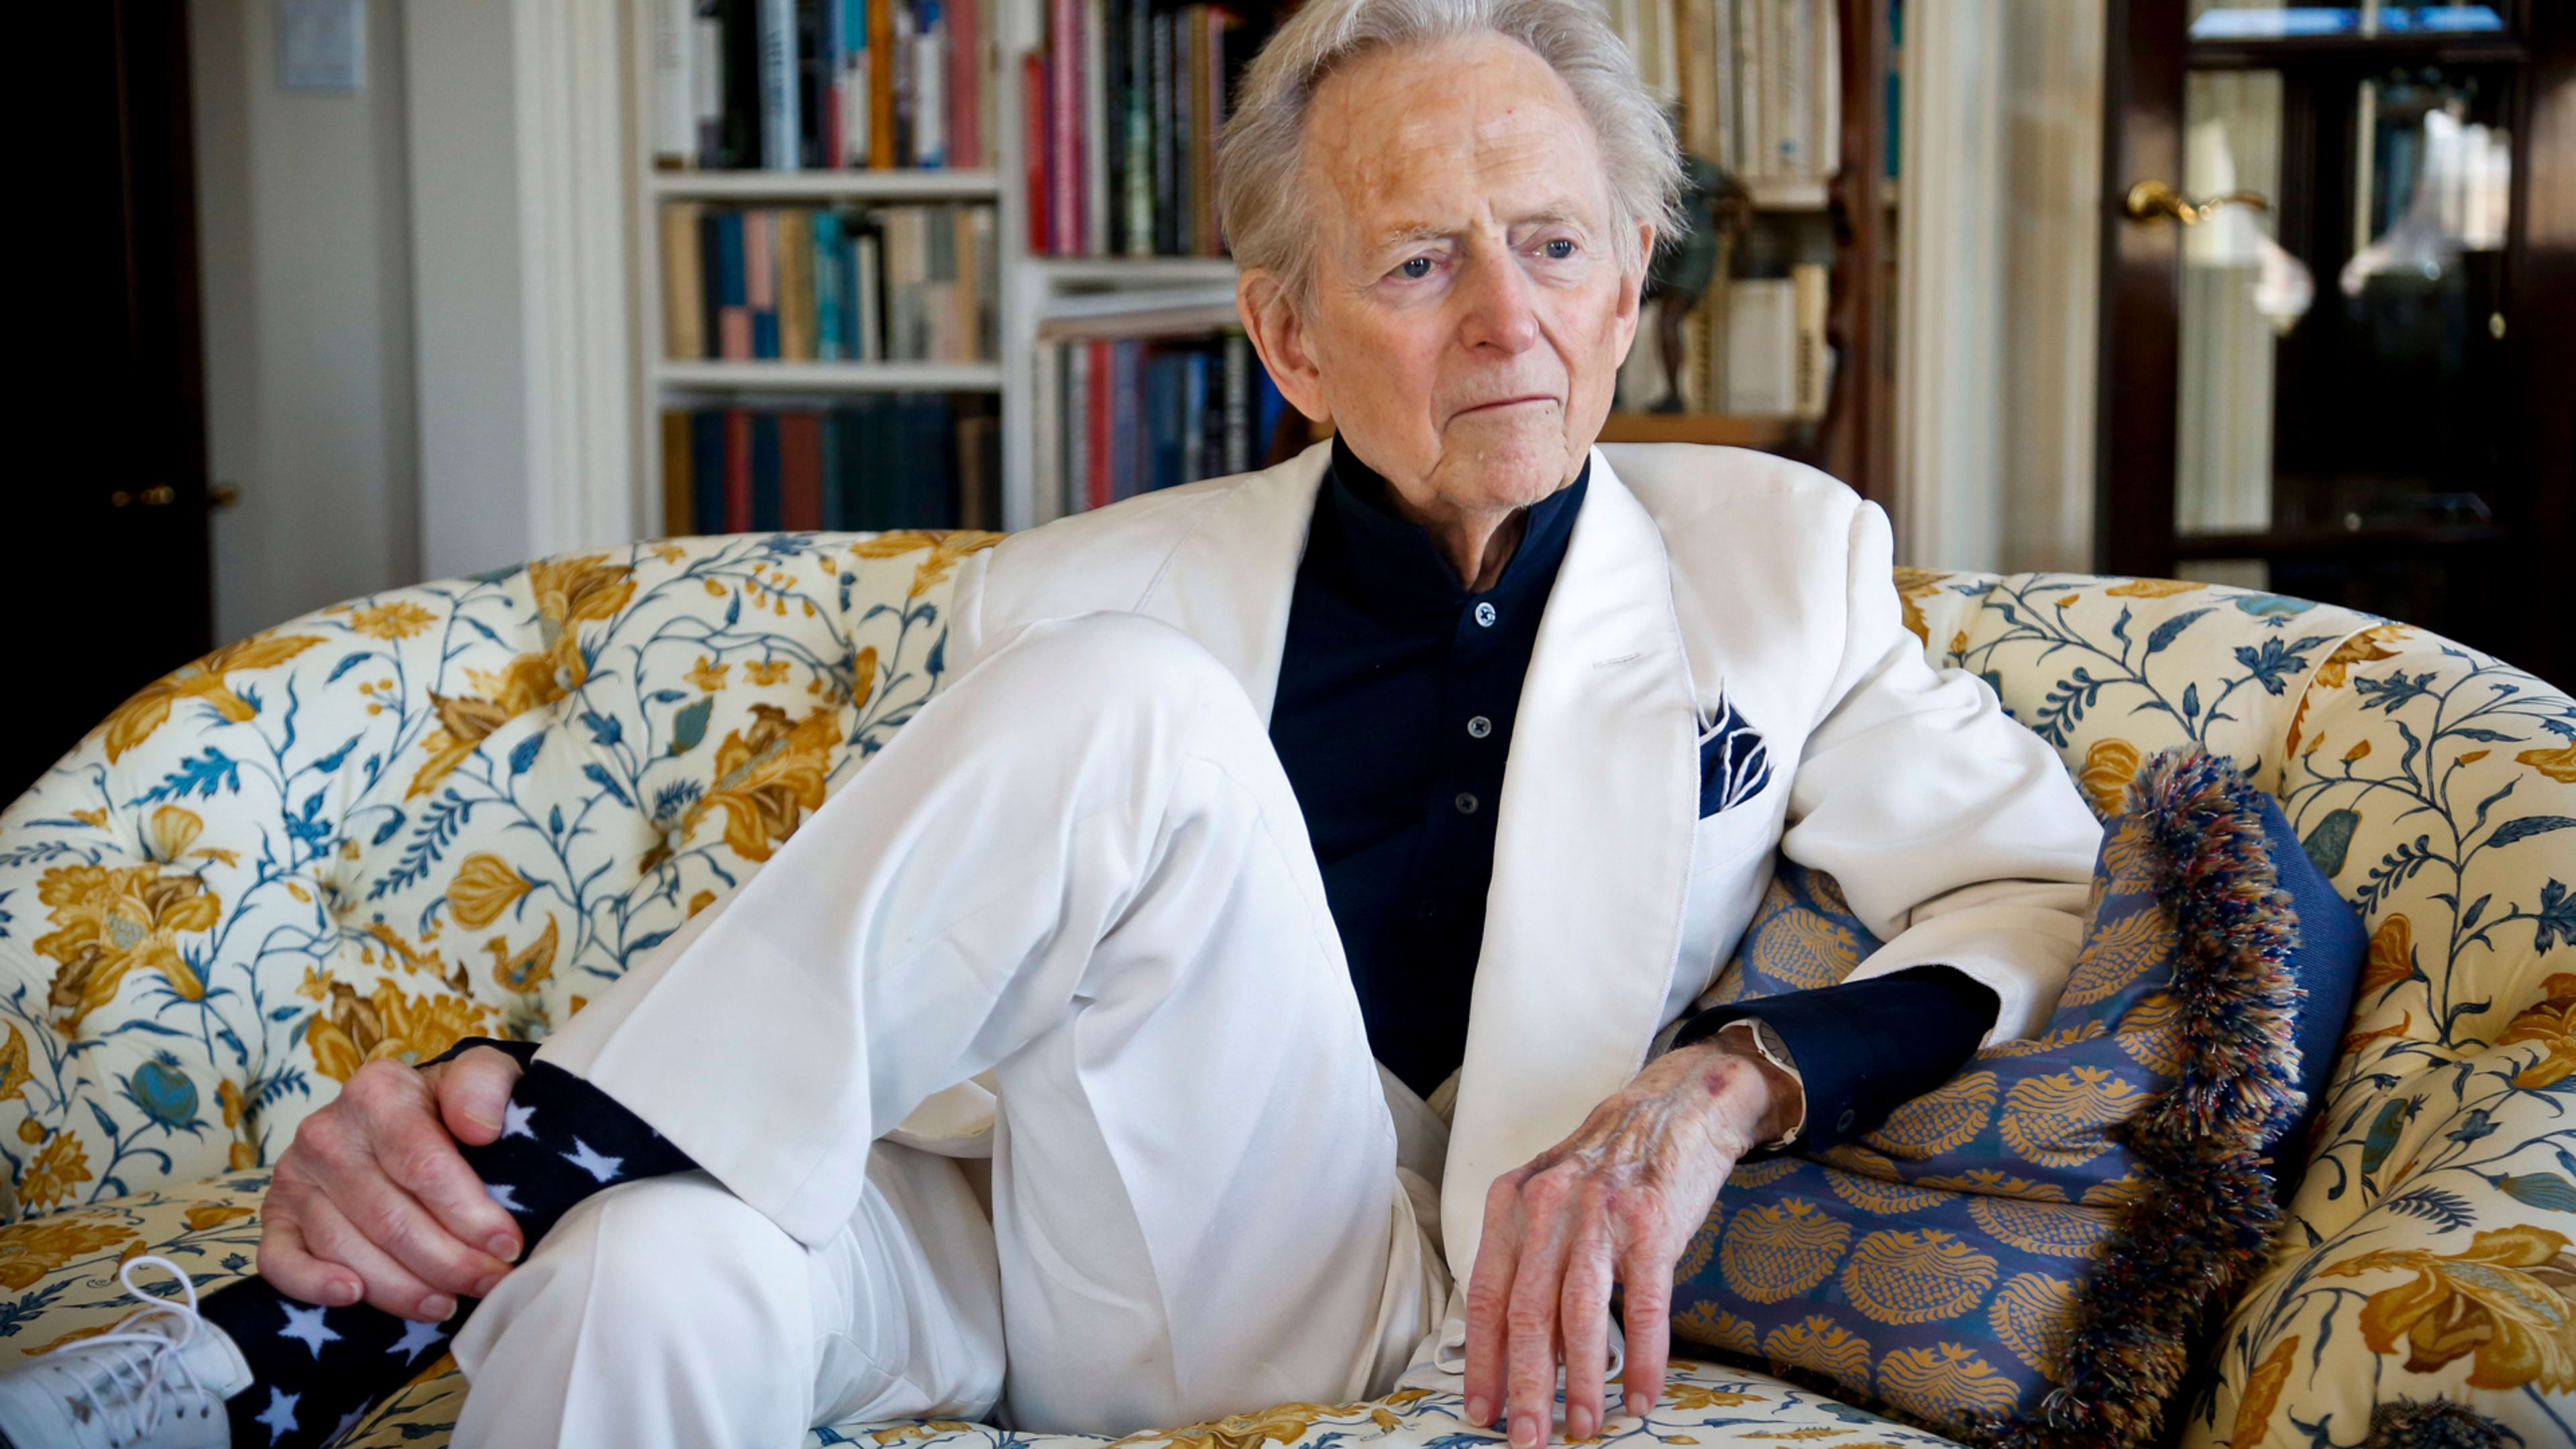 Tom Wolfe elevated journalism into enduring literature